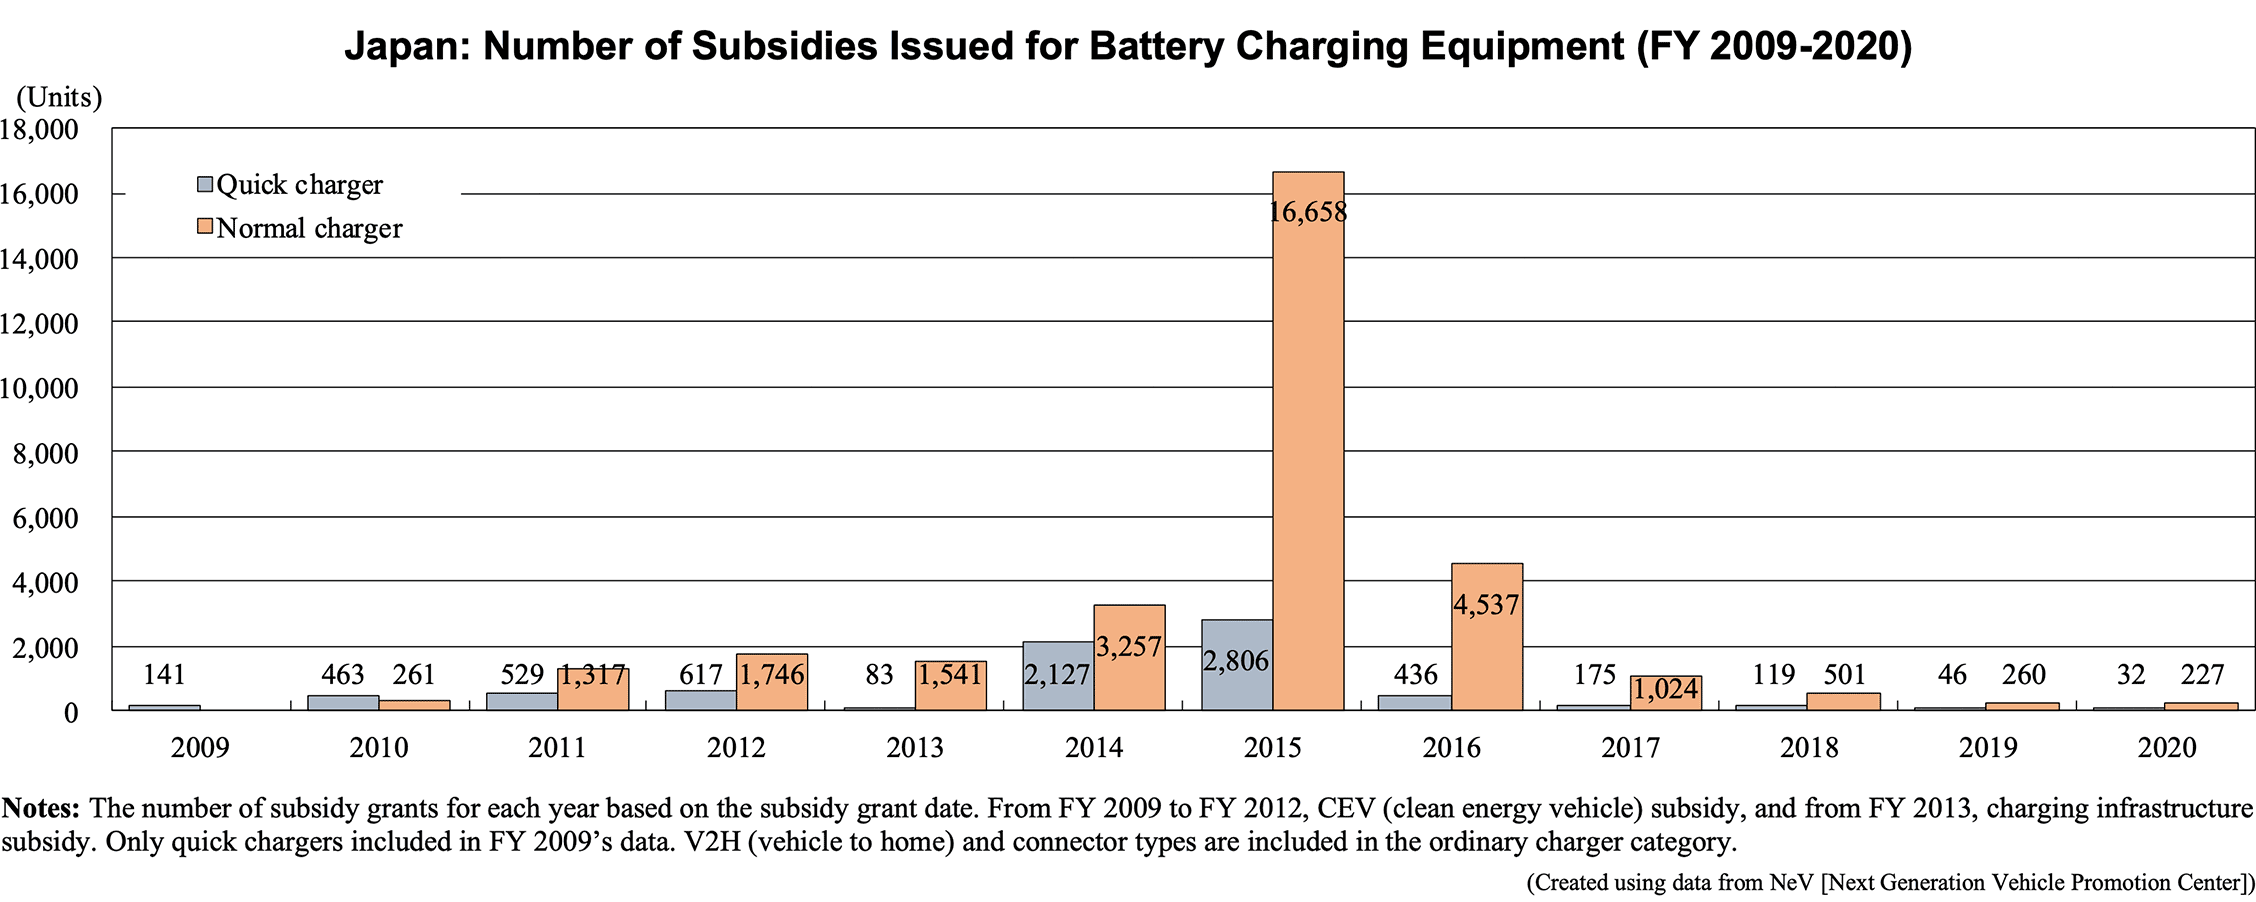 Bar graph: Japan: Number of Subsidies Issued for Battery Charging Equipment (FY 2009-2020)